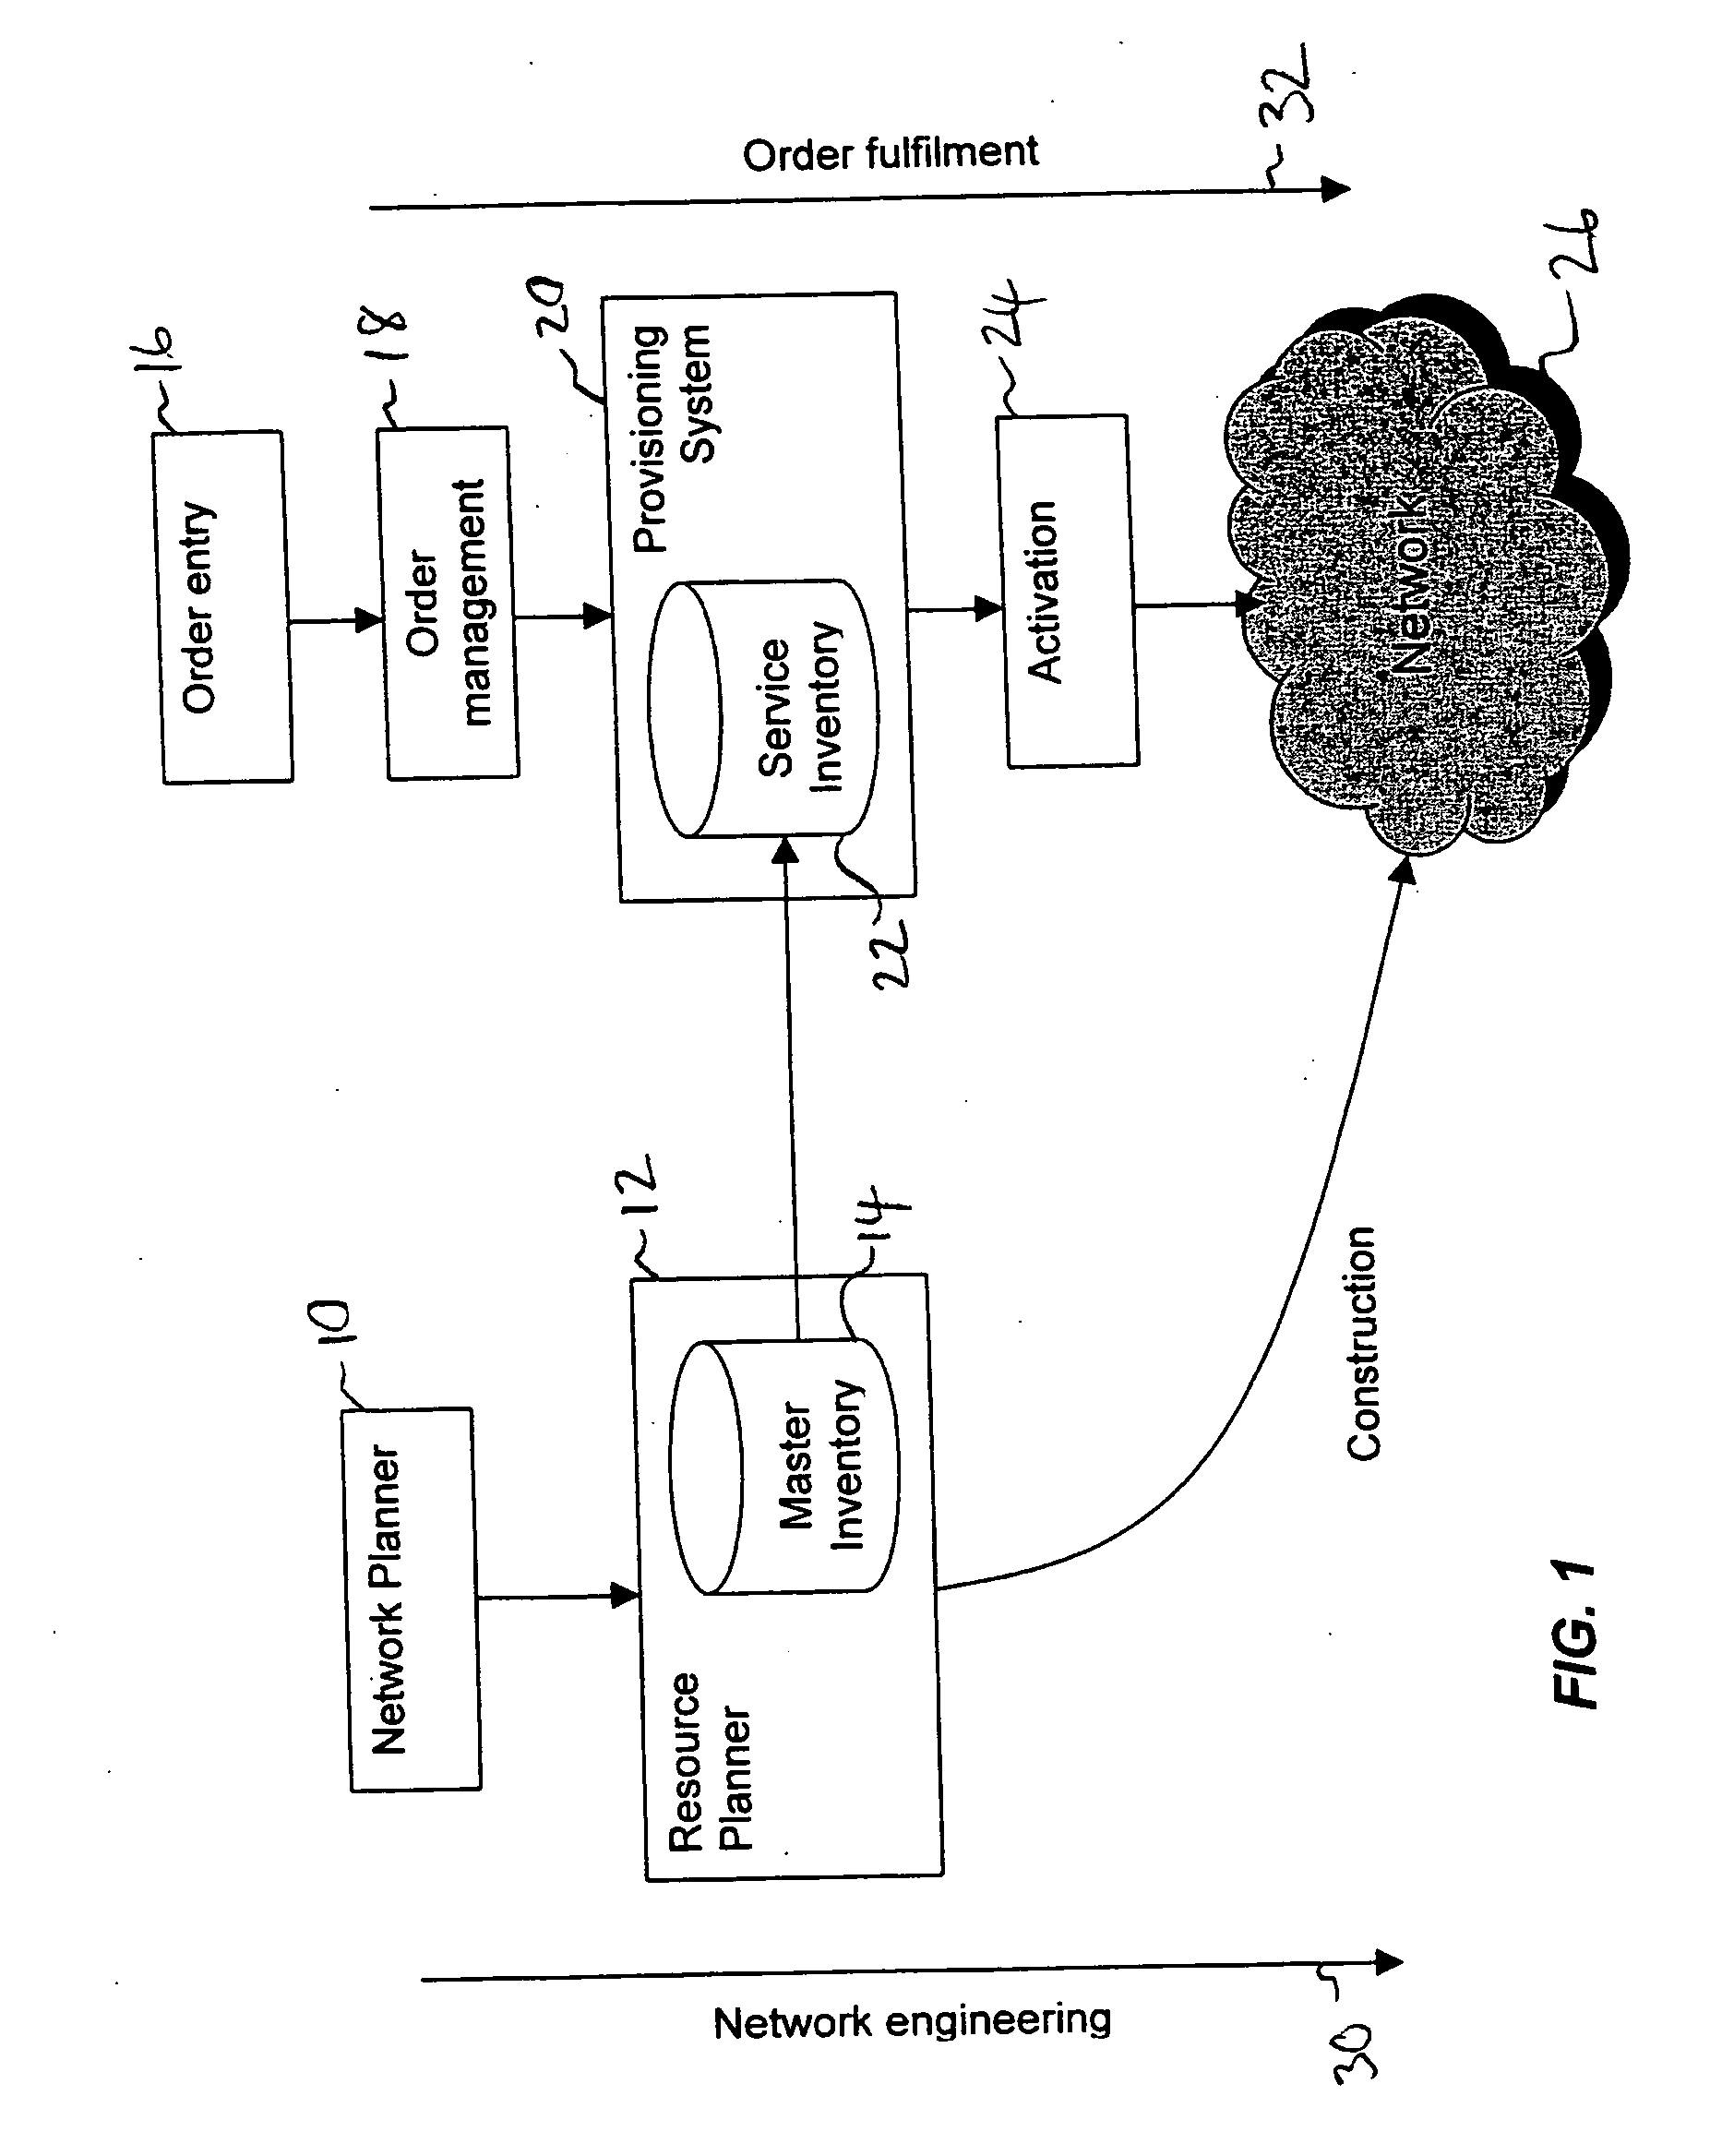 Method and system for network planning